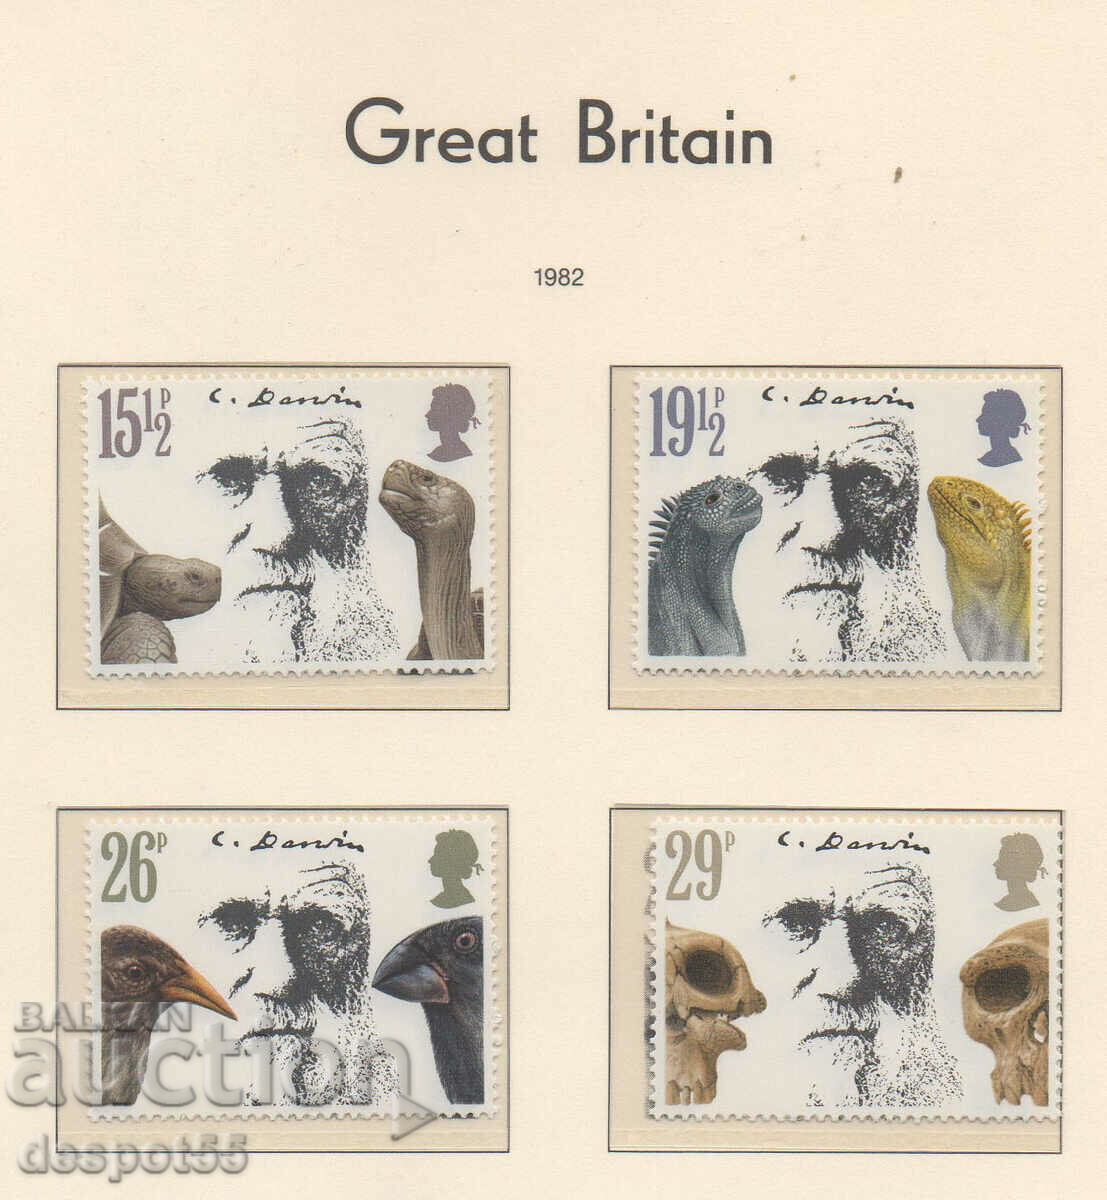 1982. Great Britain. 100 years since the death of Charles Darwin.